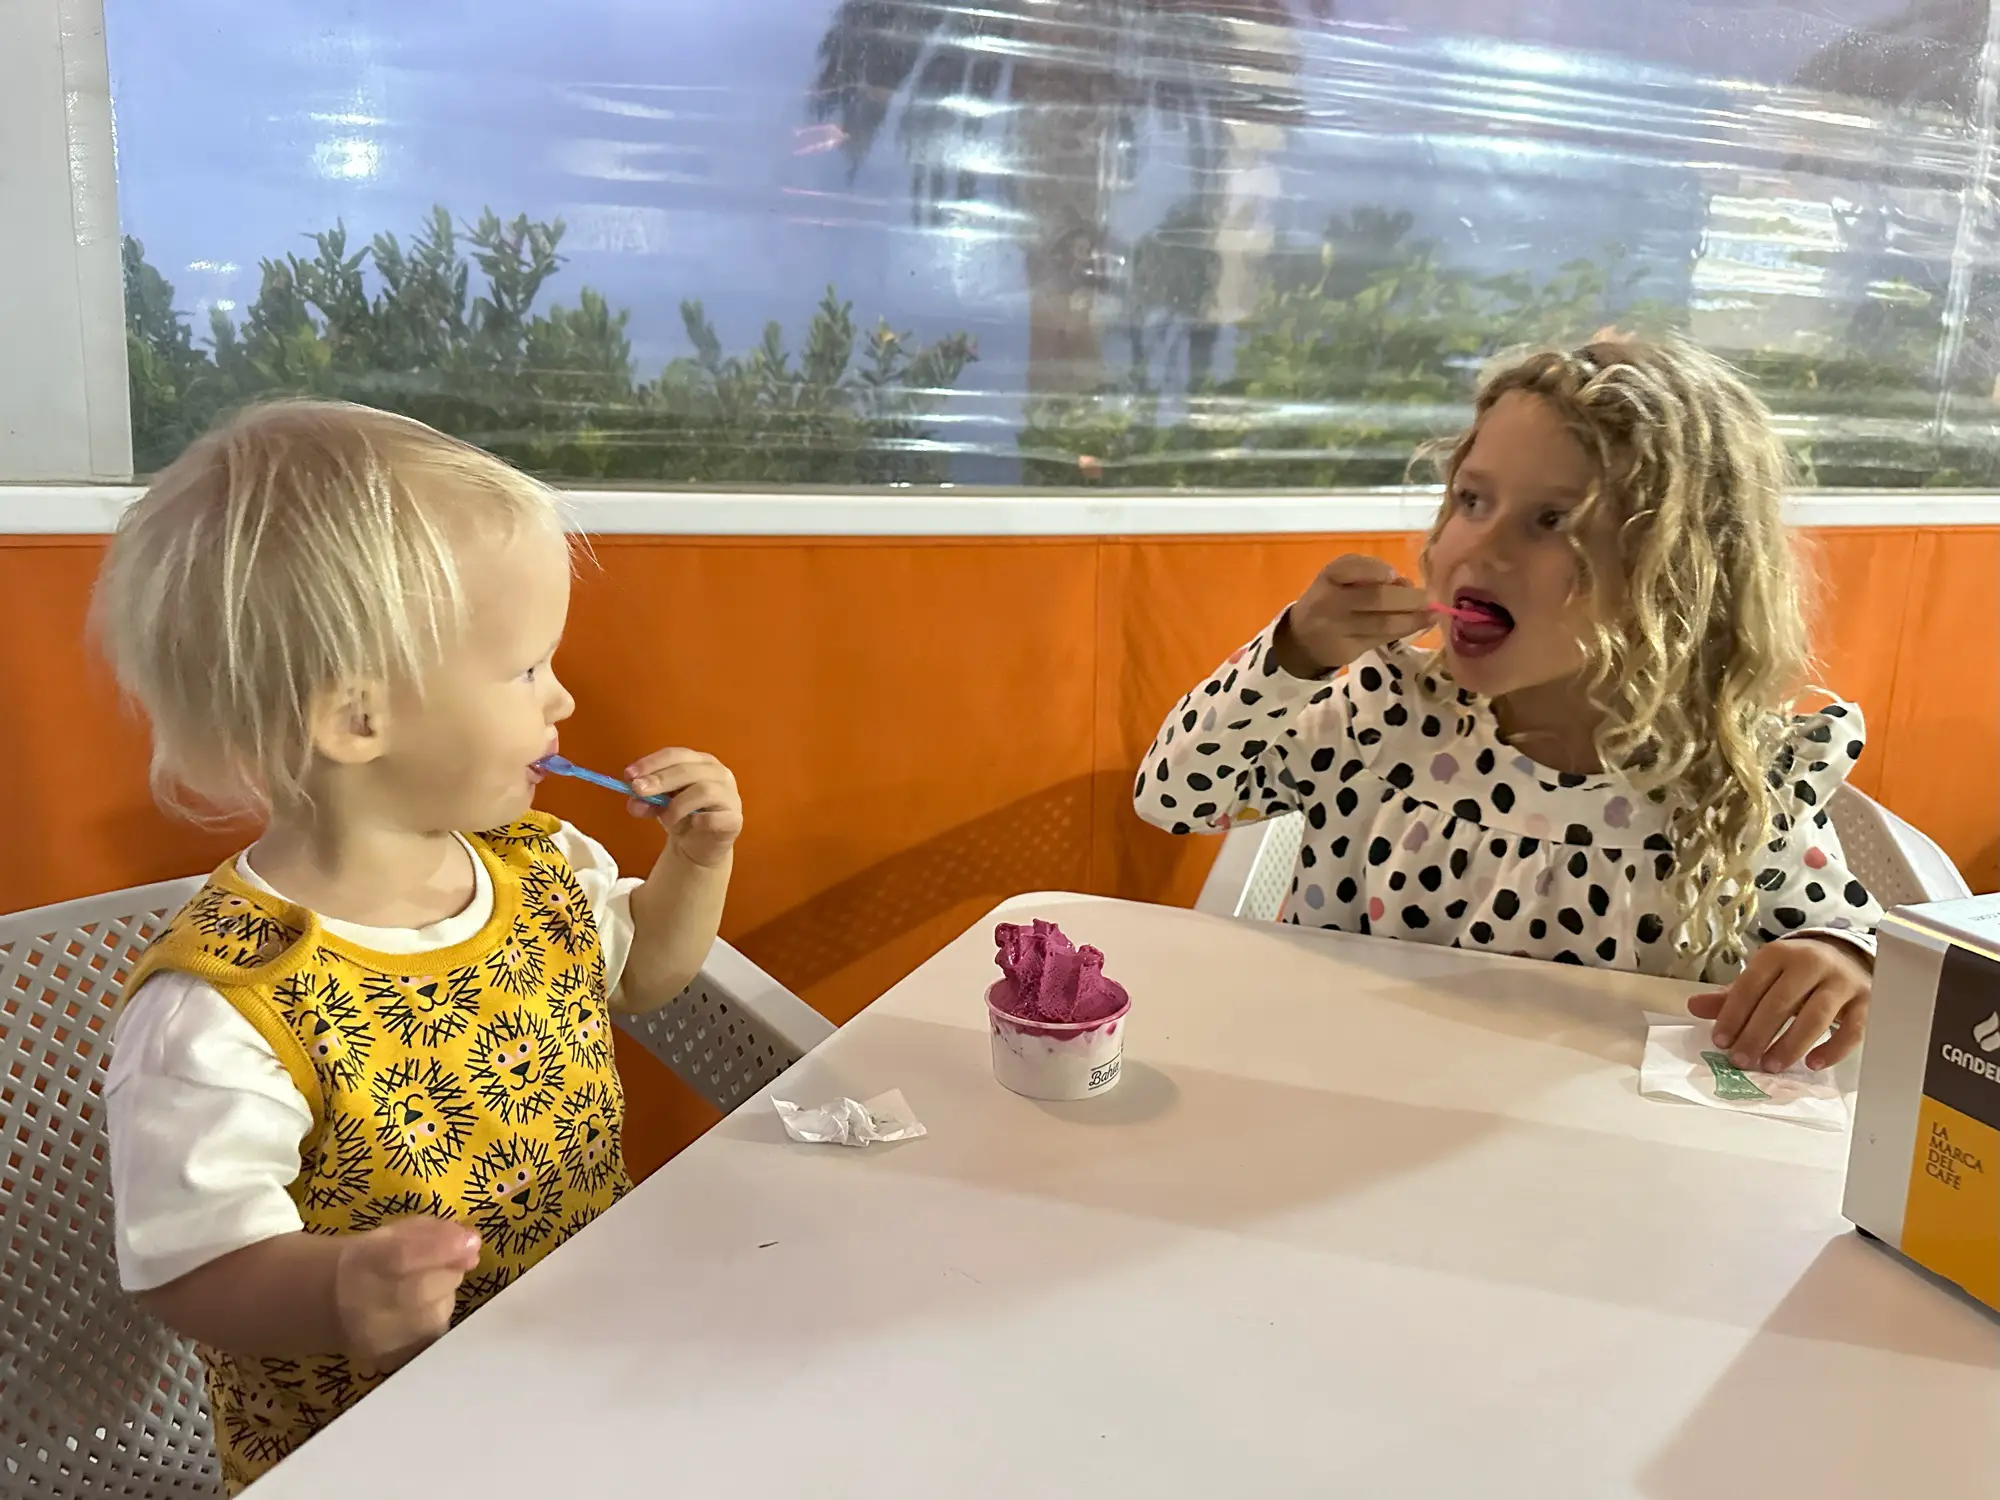 Eating gelato is an activity for sunny days or rainy days in La Herradura with kids